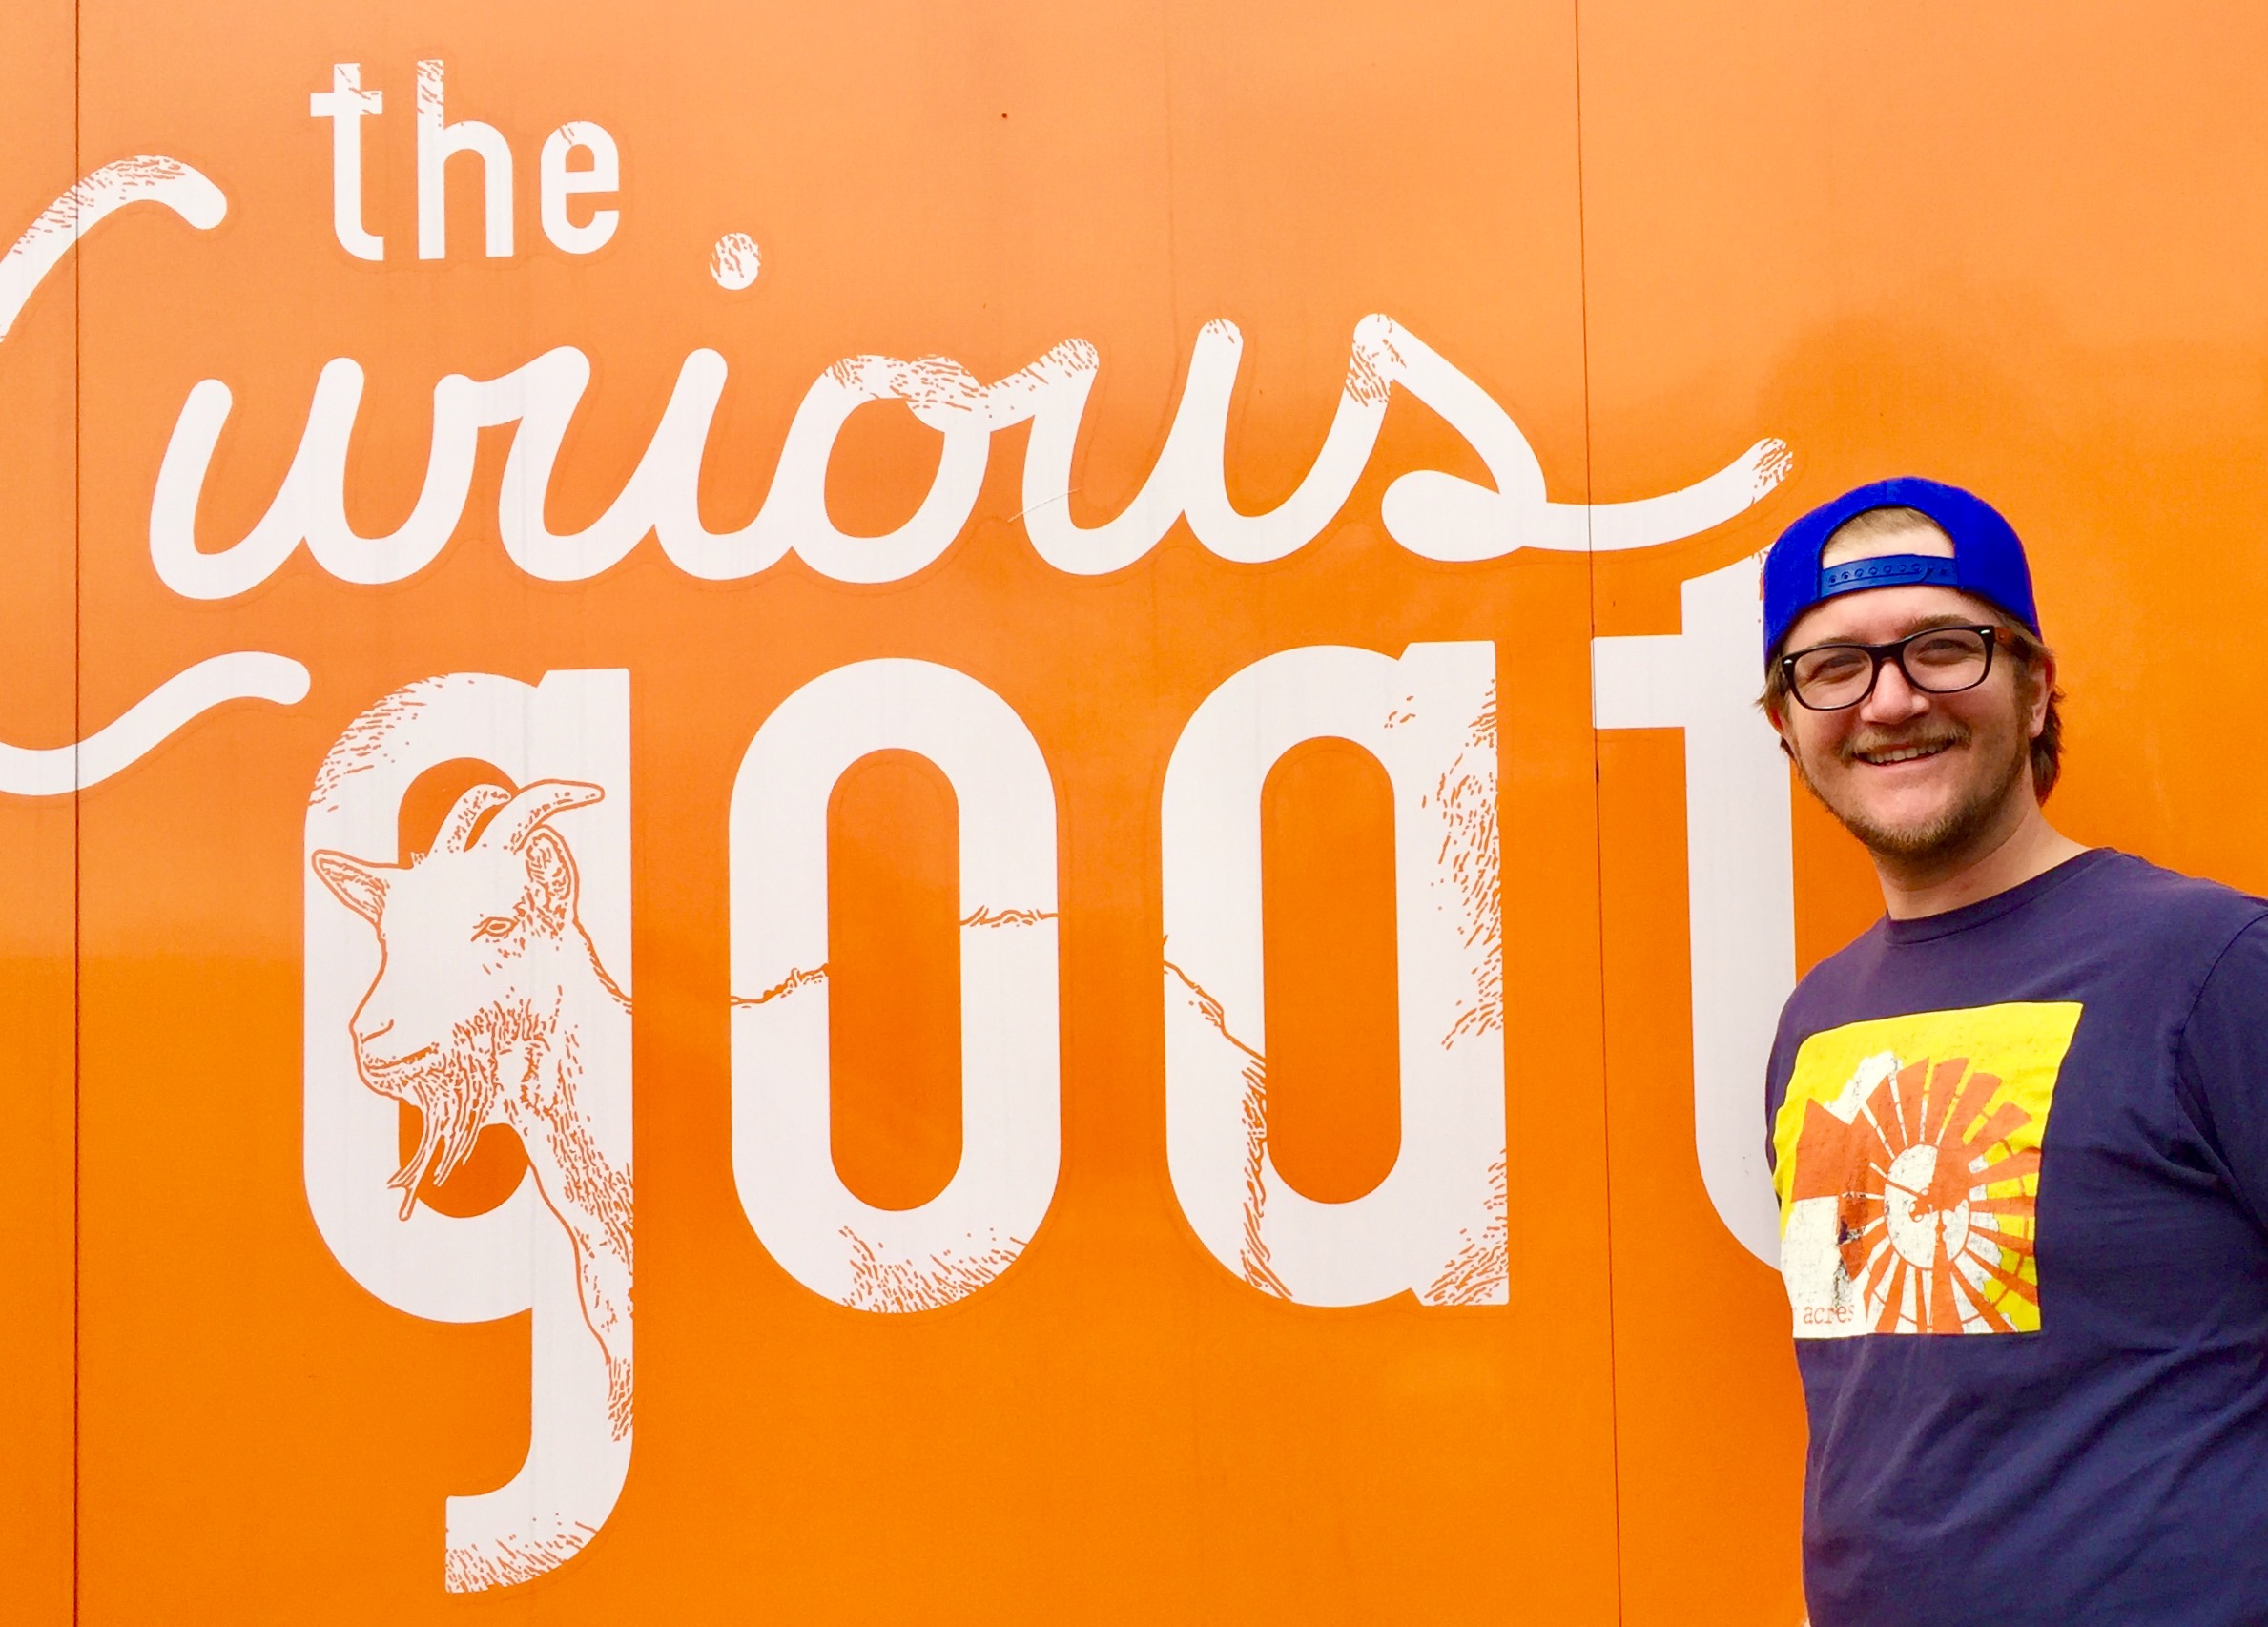 Chef/Owner Ian Gray with The Curious Goat